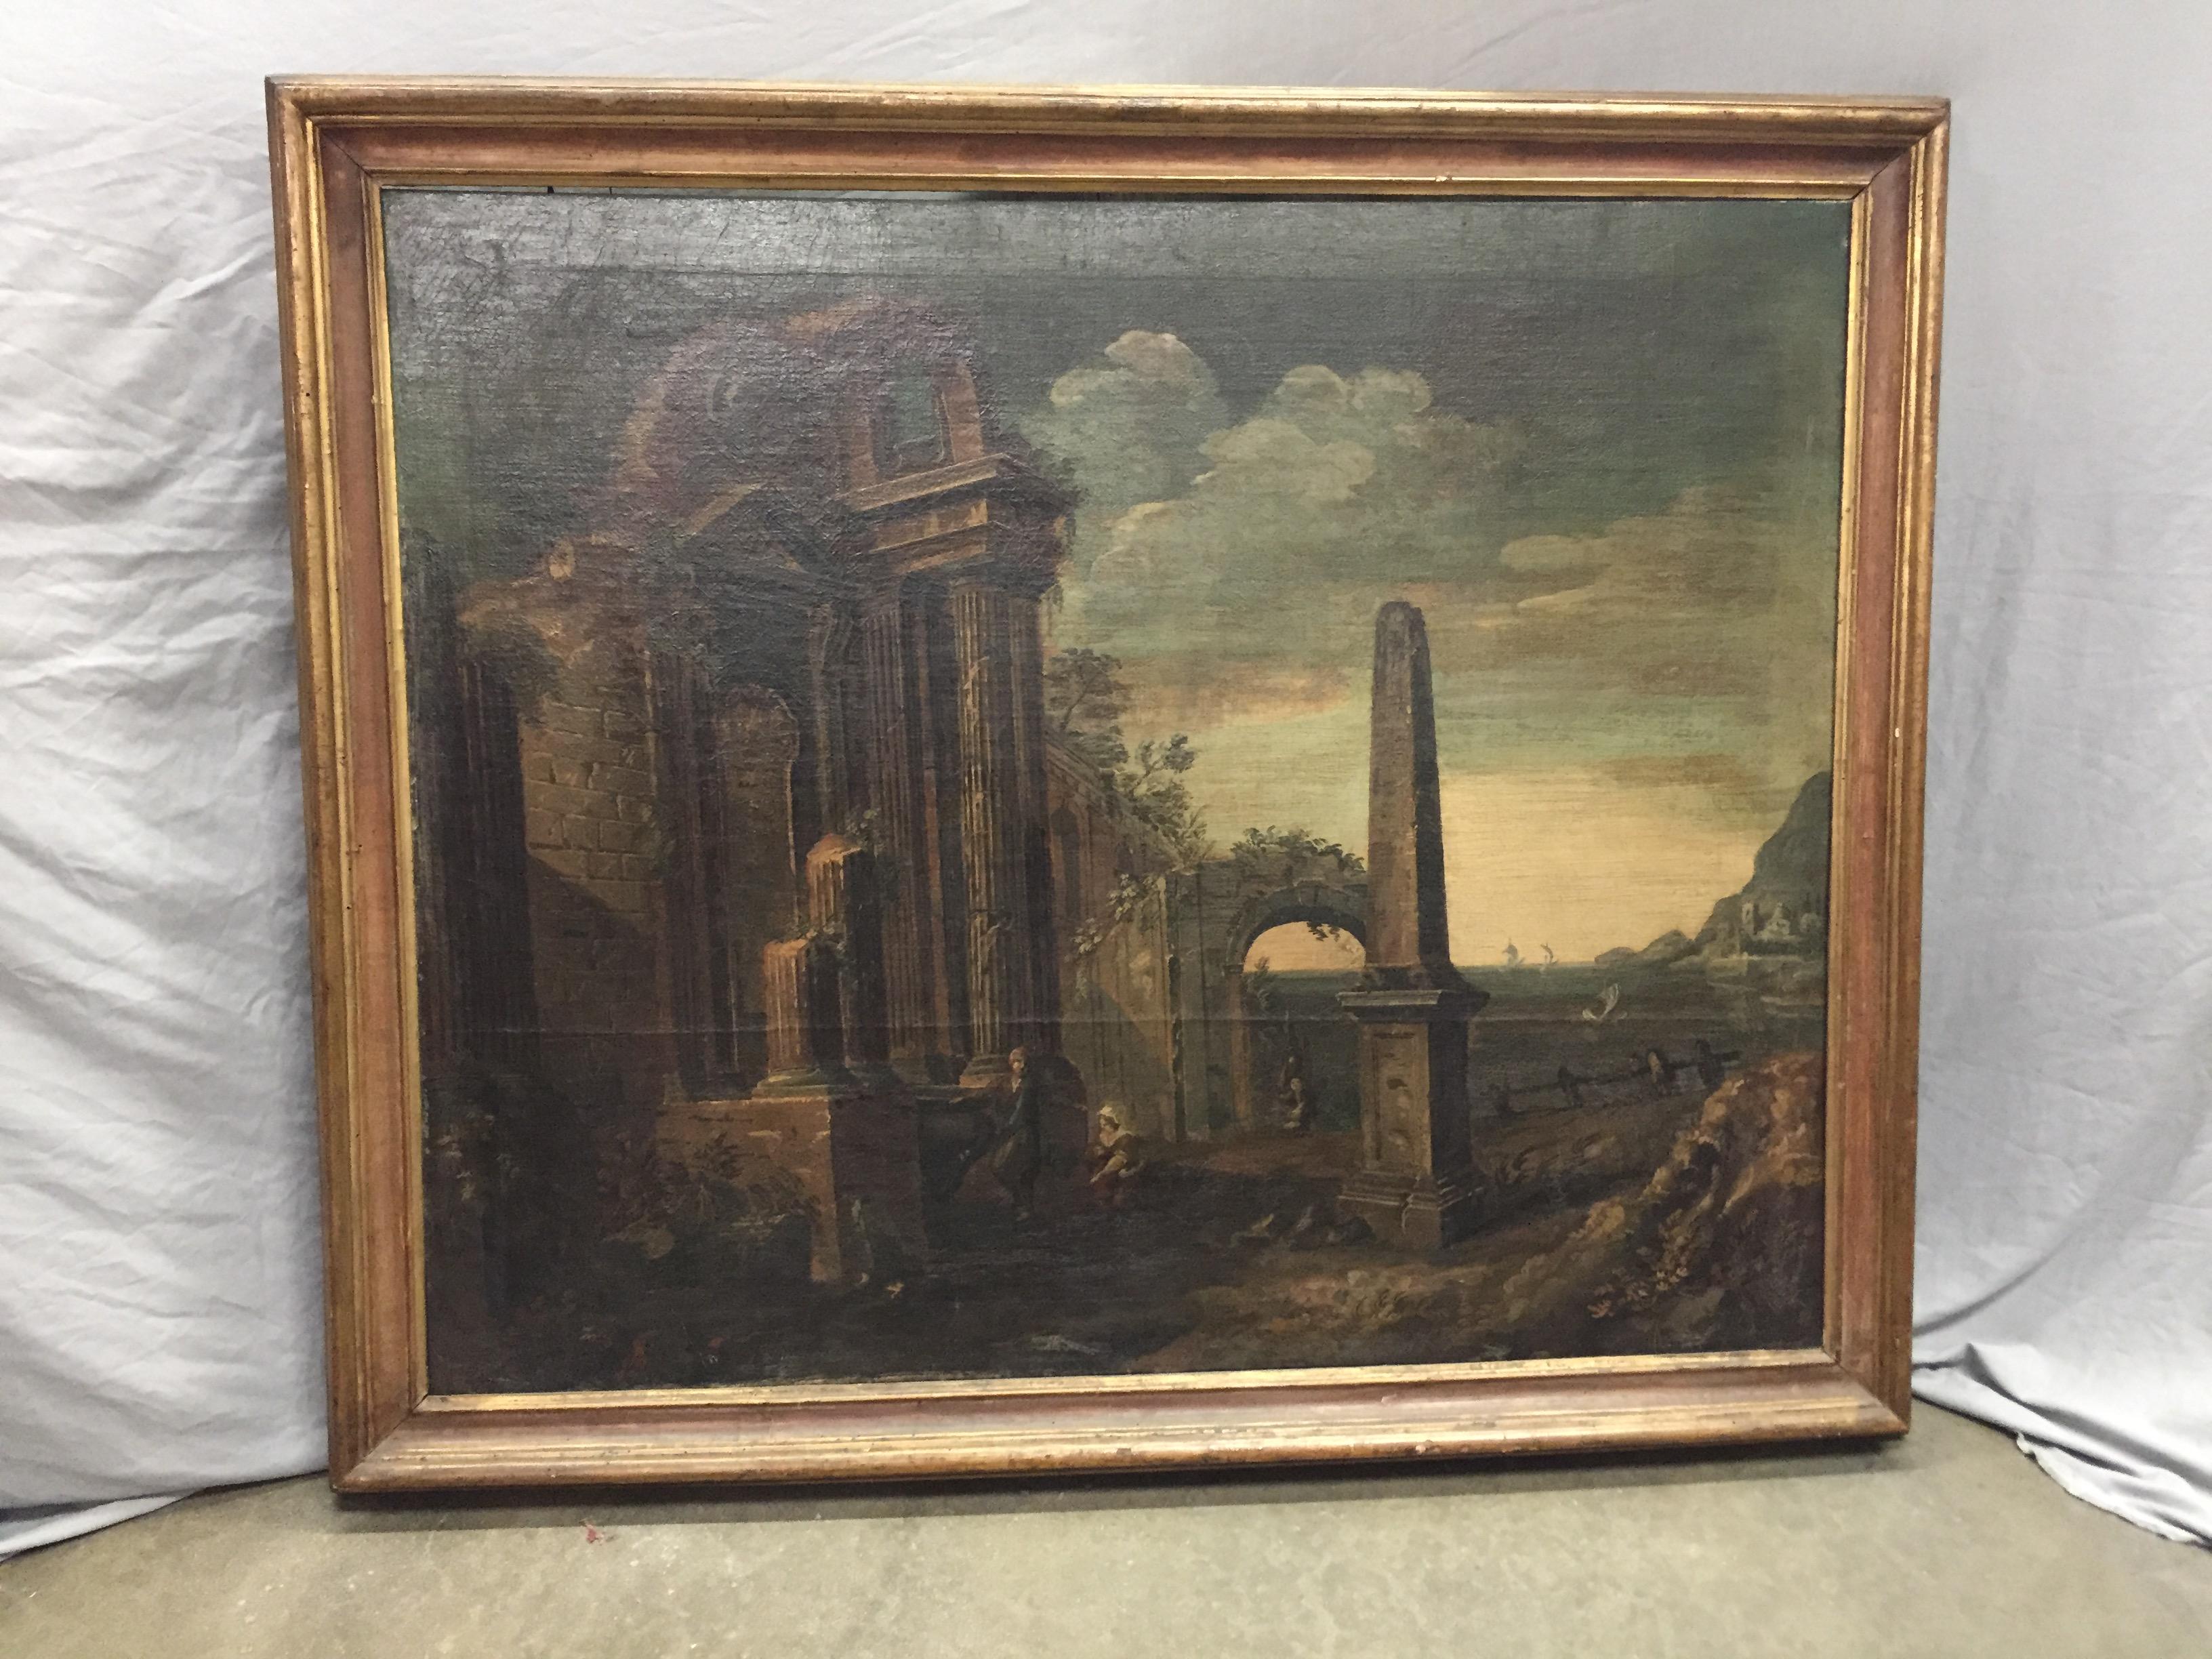 Oil on canvas of Roman ruins and a large obelisk on a lush landscape with various Classical figures. A mountain landscape off to the distance with a sunset sky. 
Late 17th-early 18th century.
In gilt frame. 

Meticulous attention was used to